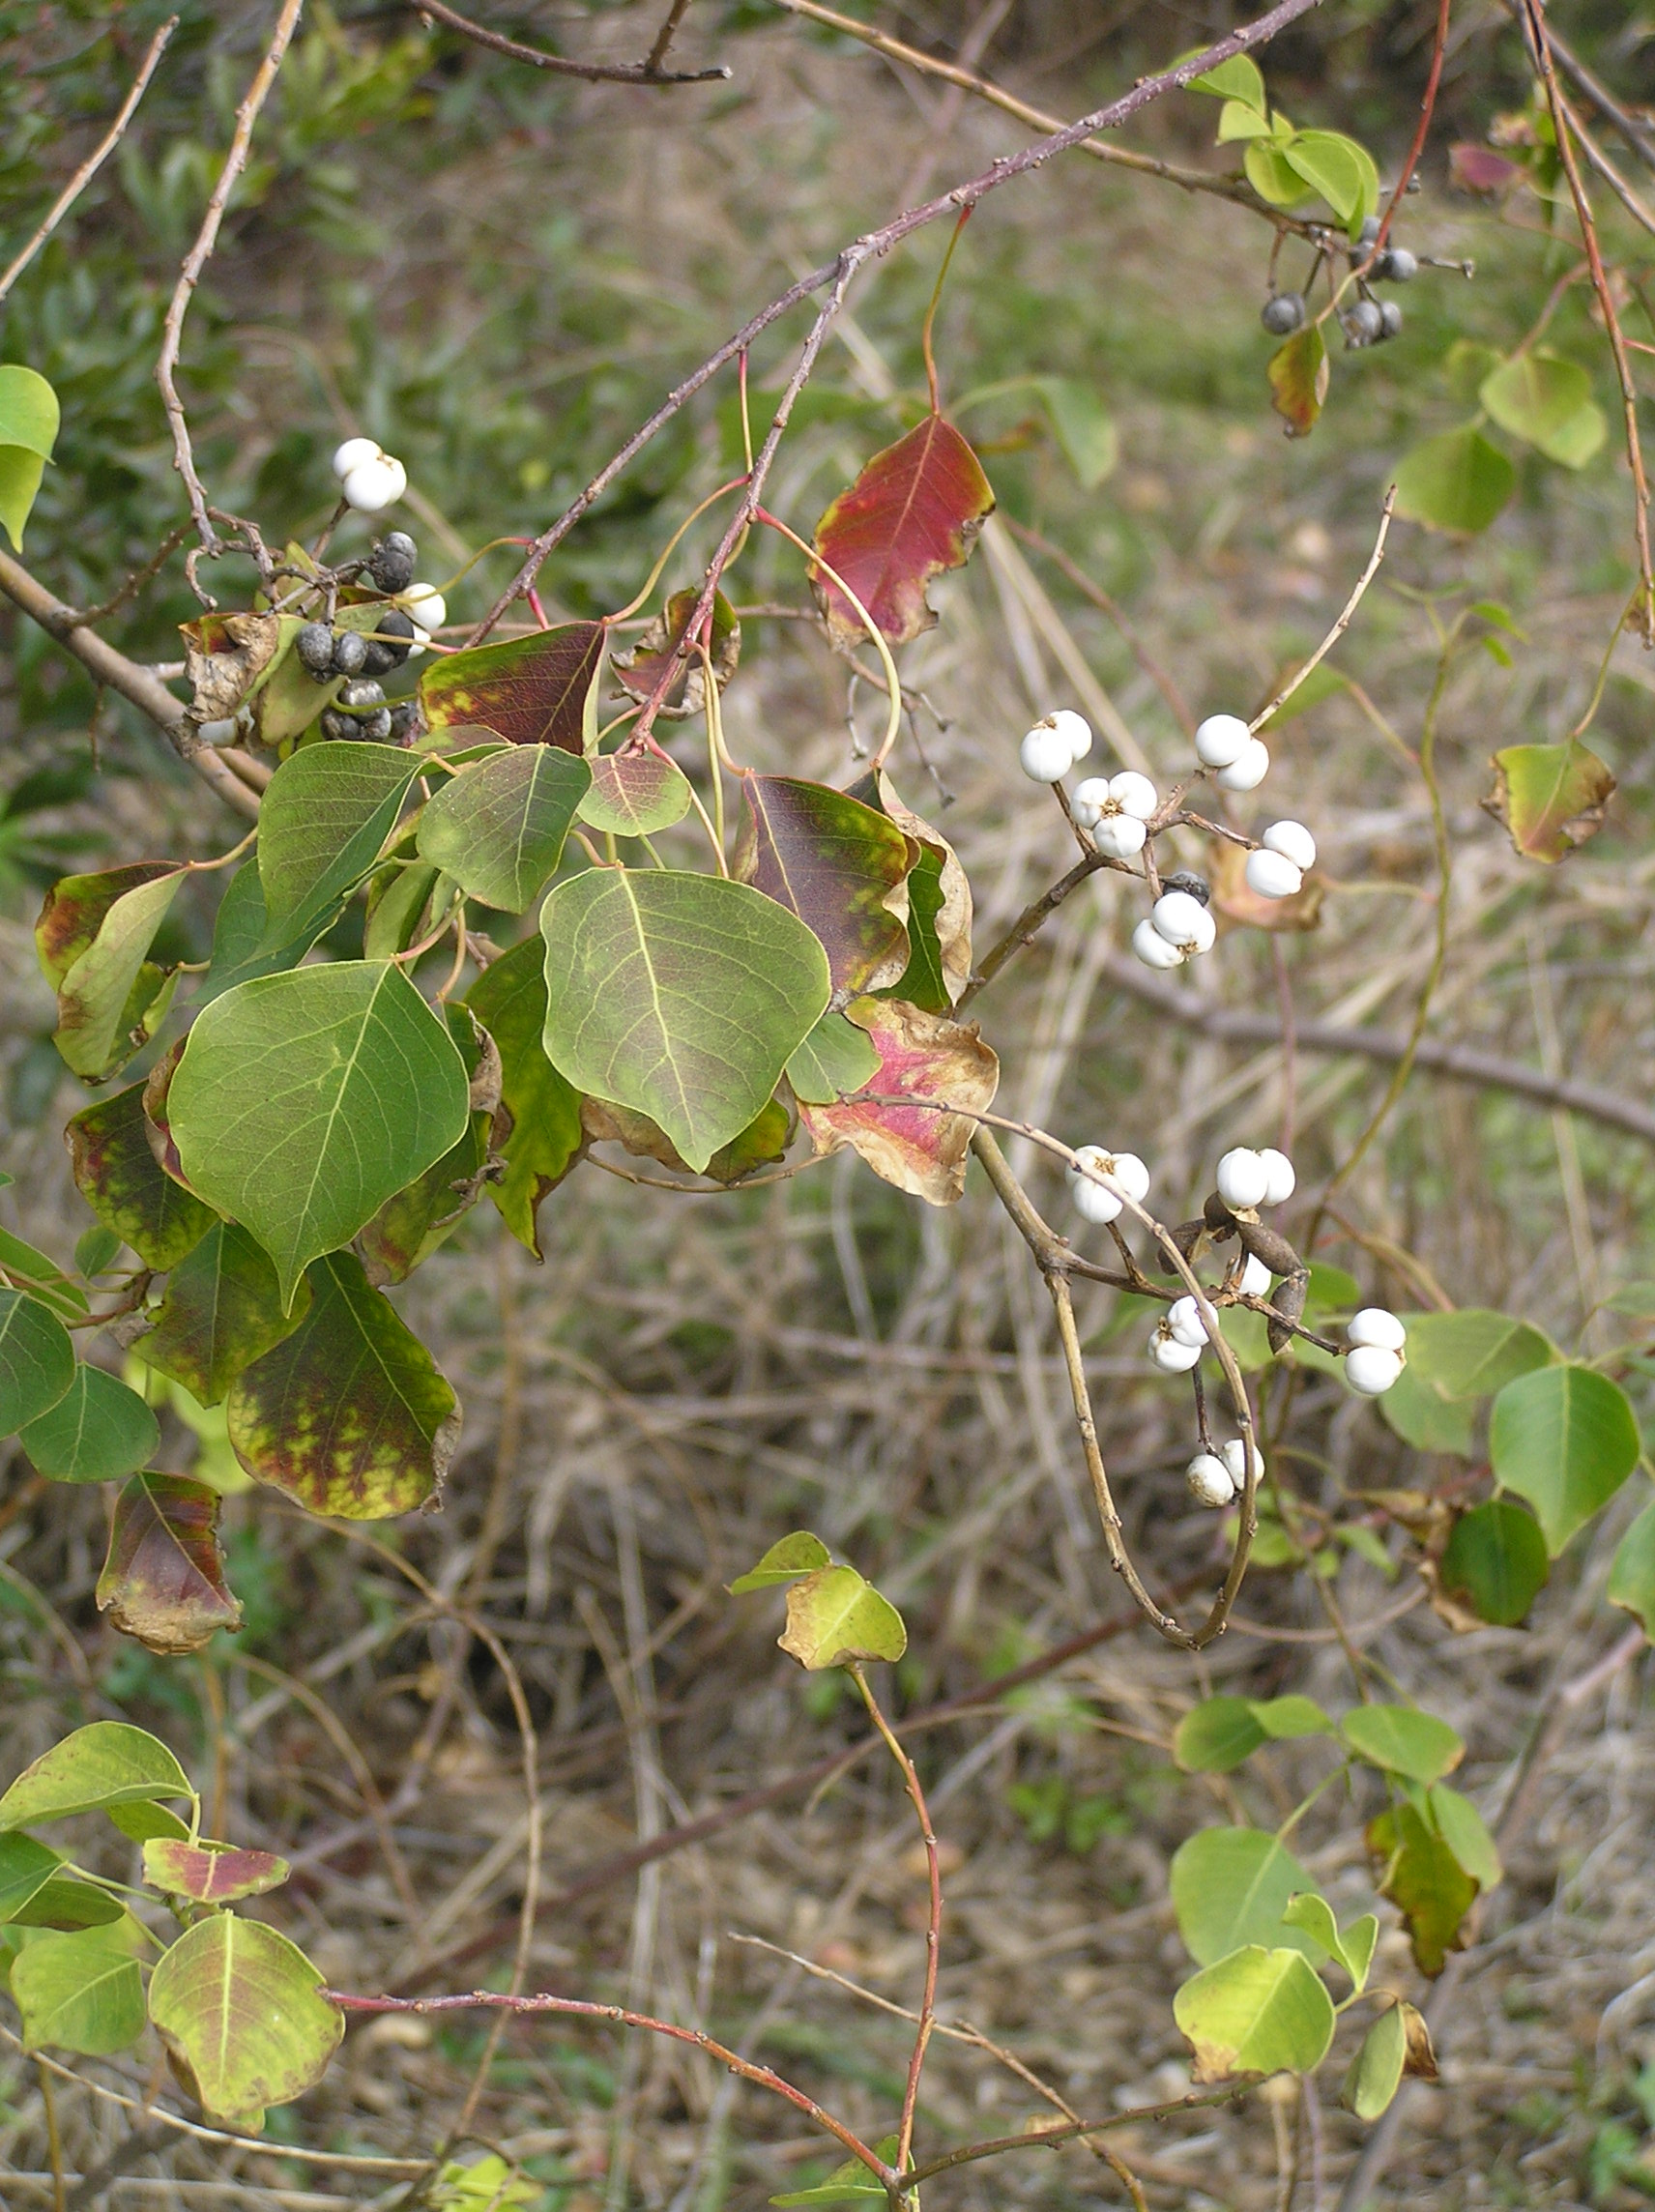 Some leaves turning red before dehiscence, and mature fruits present.